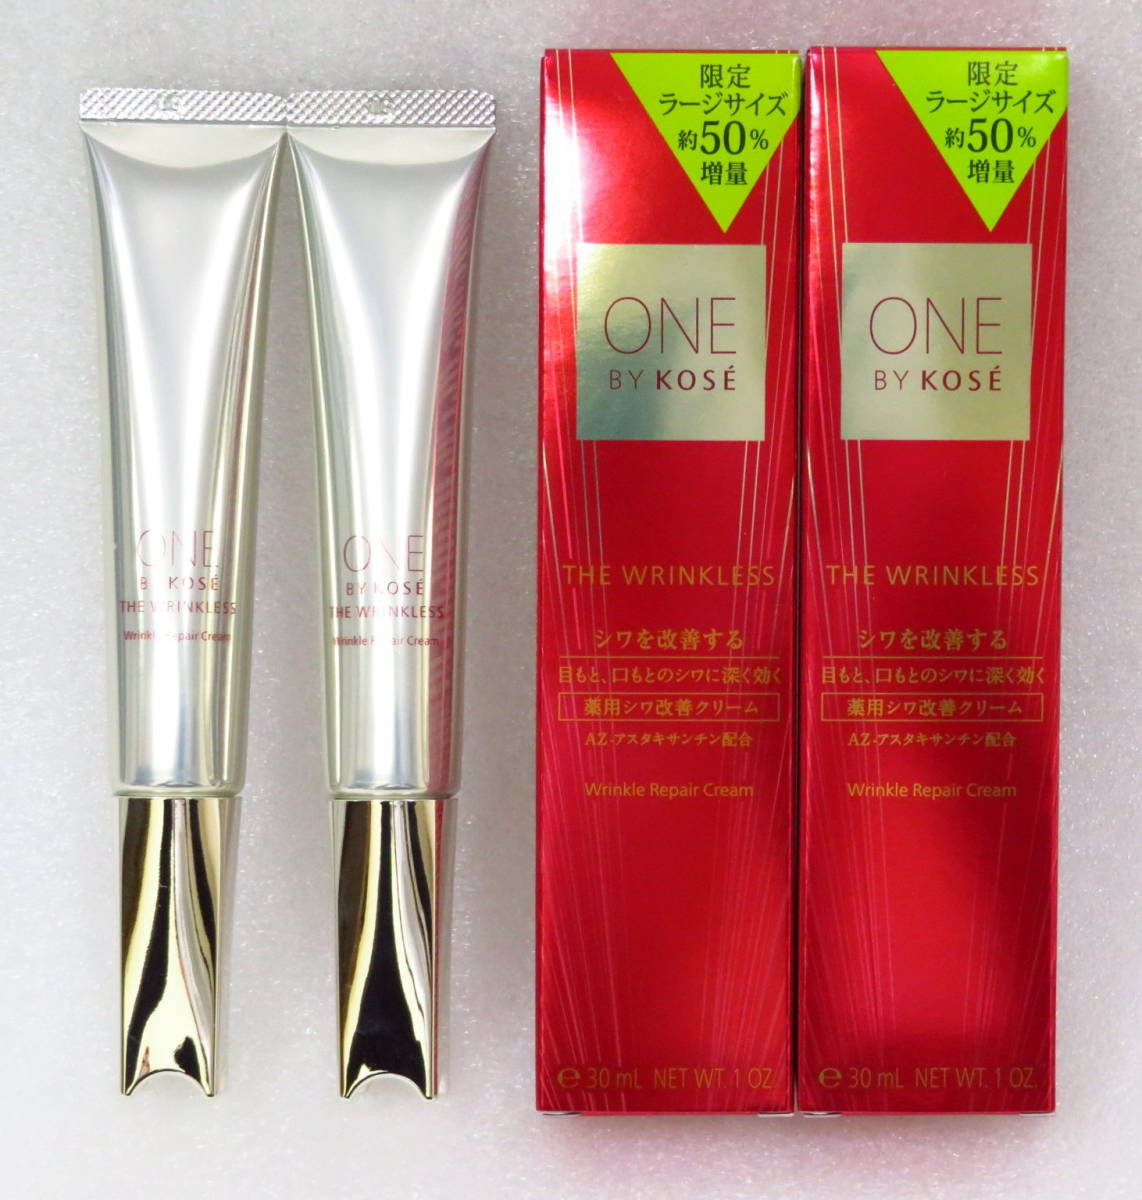 71%OFF!】 ONE BY KOSE ザ リンクレスS ラージサイズ 30g 30ml